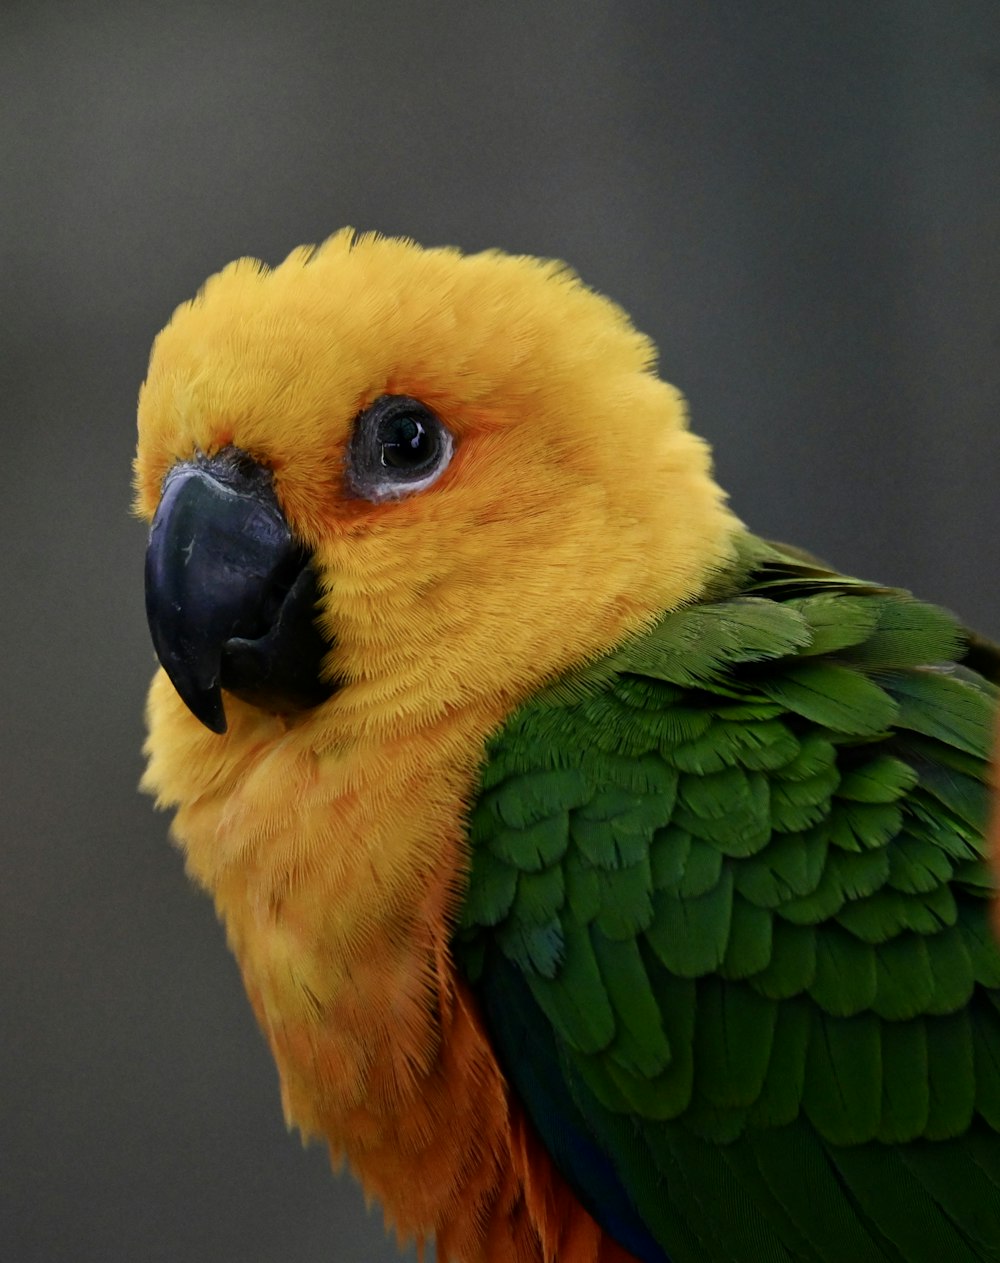 a close up of a yellow and green parrot